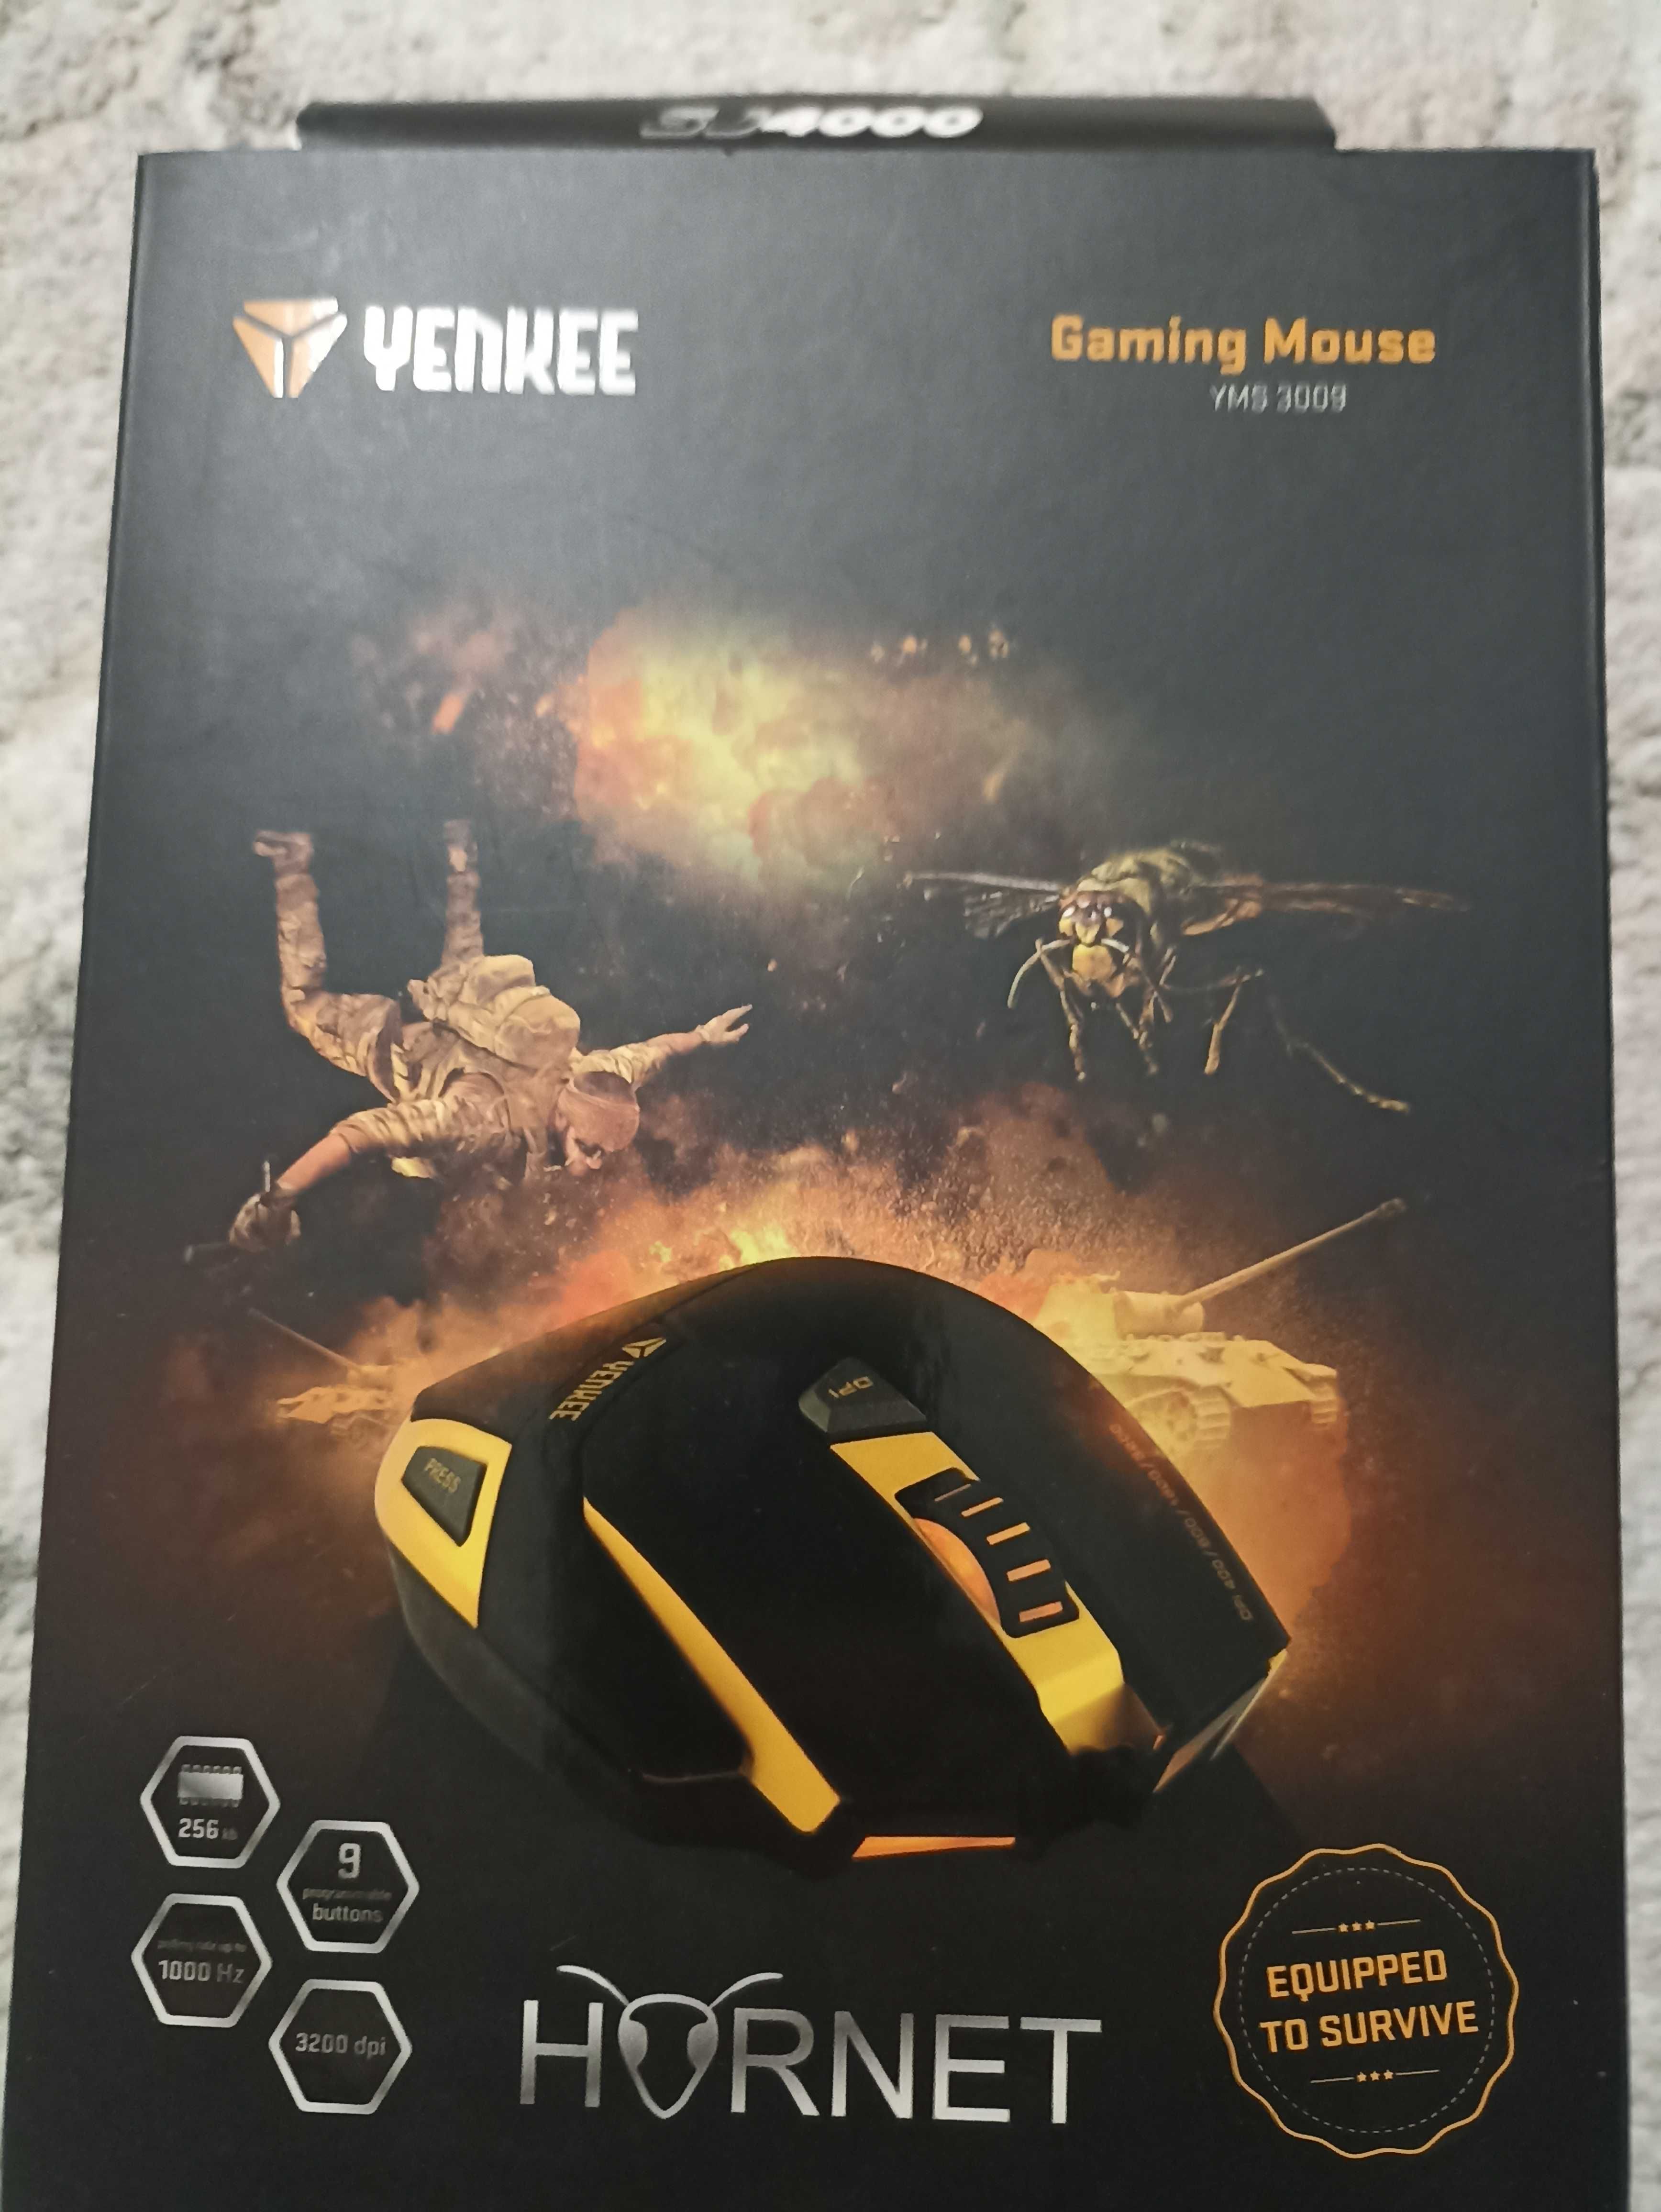 Mouse gaming yms 3009